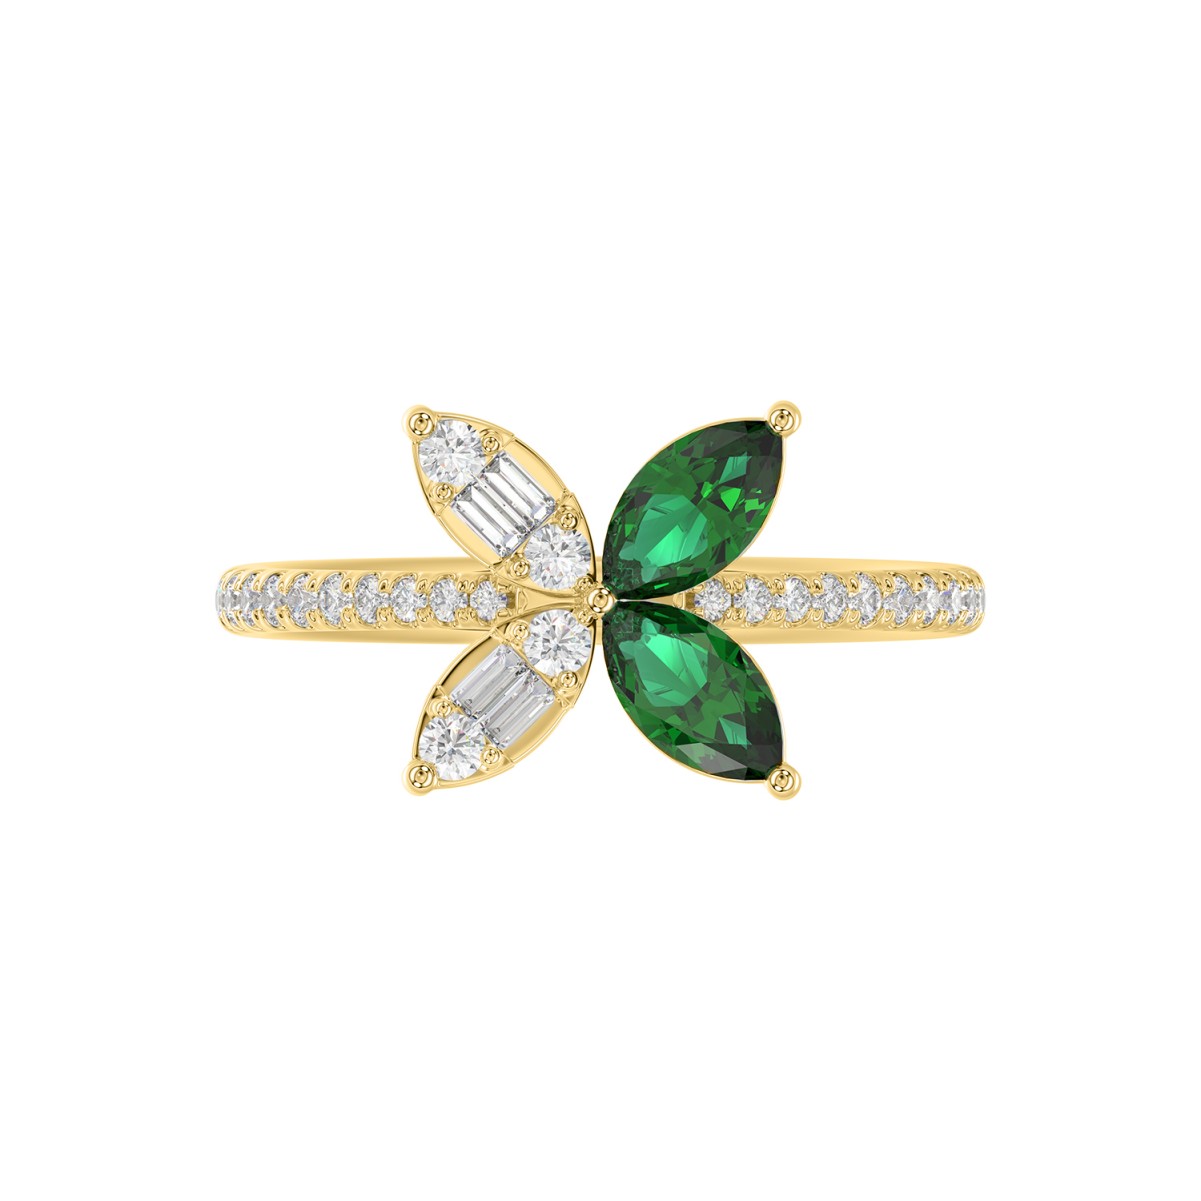 14K YELLOW GOLD 1 7/8CT ROUND/BAGUETTE/MARQUISE DIAMOND LADIES FASHION RING(COLOR STONE MARQUISE GREEN EMERALD DIAMOND 1 5/8 CT)